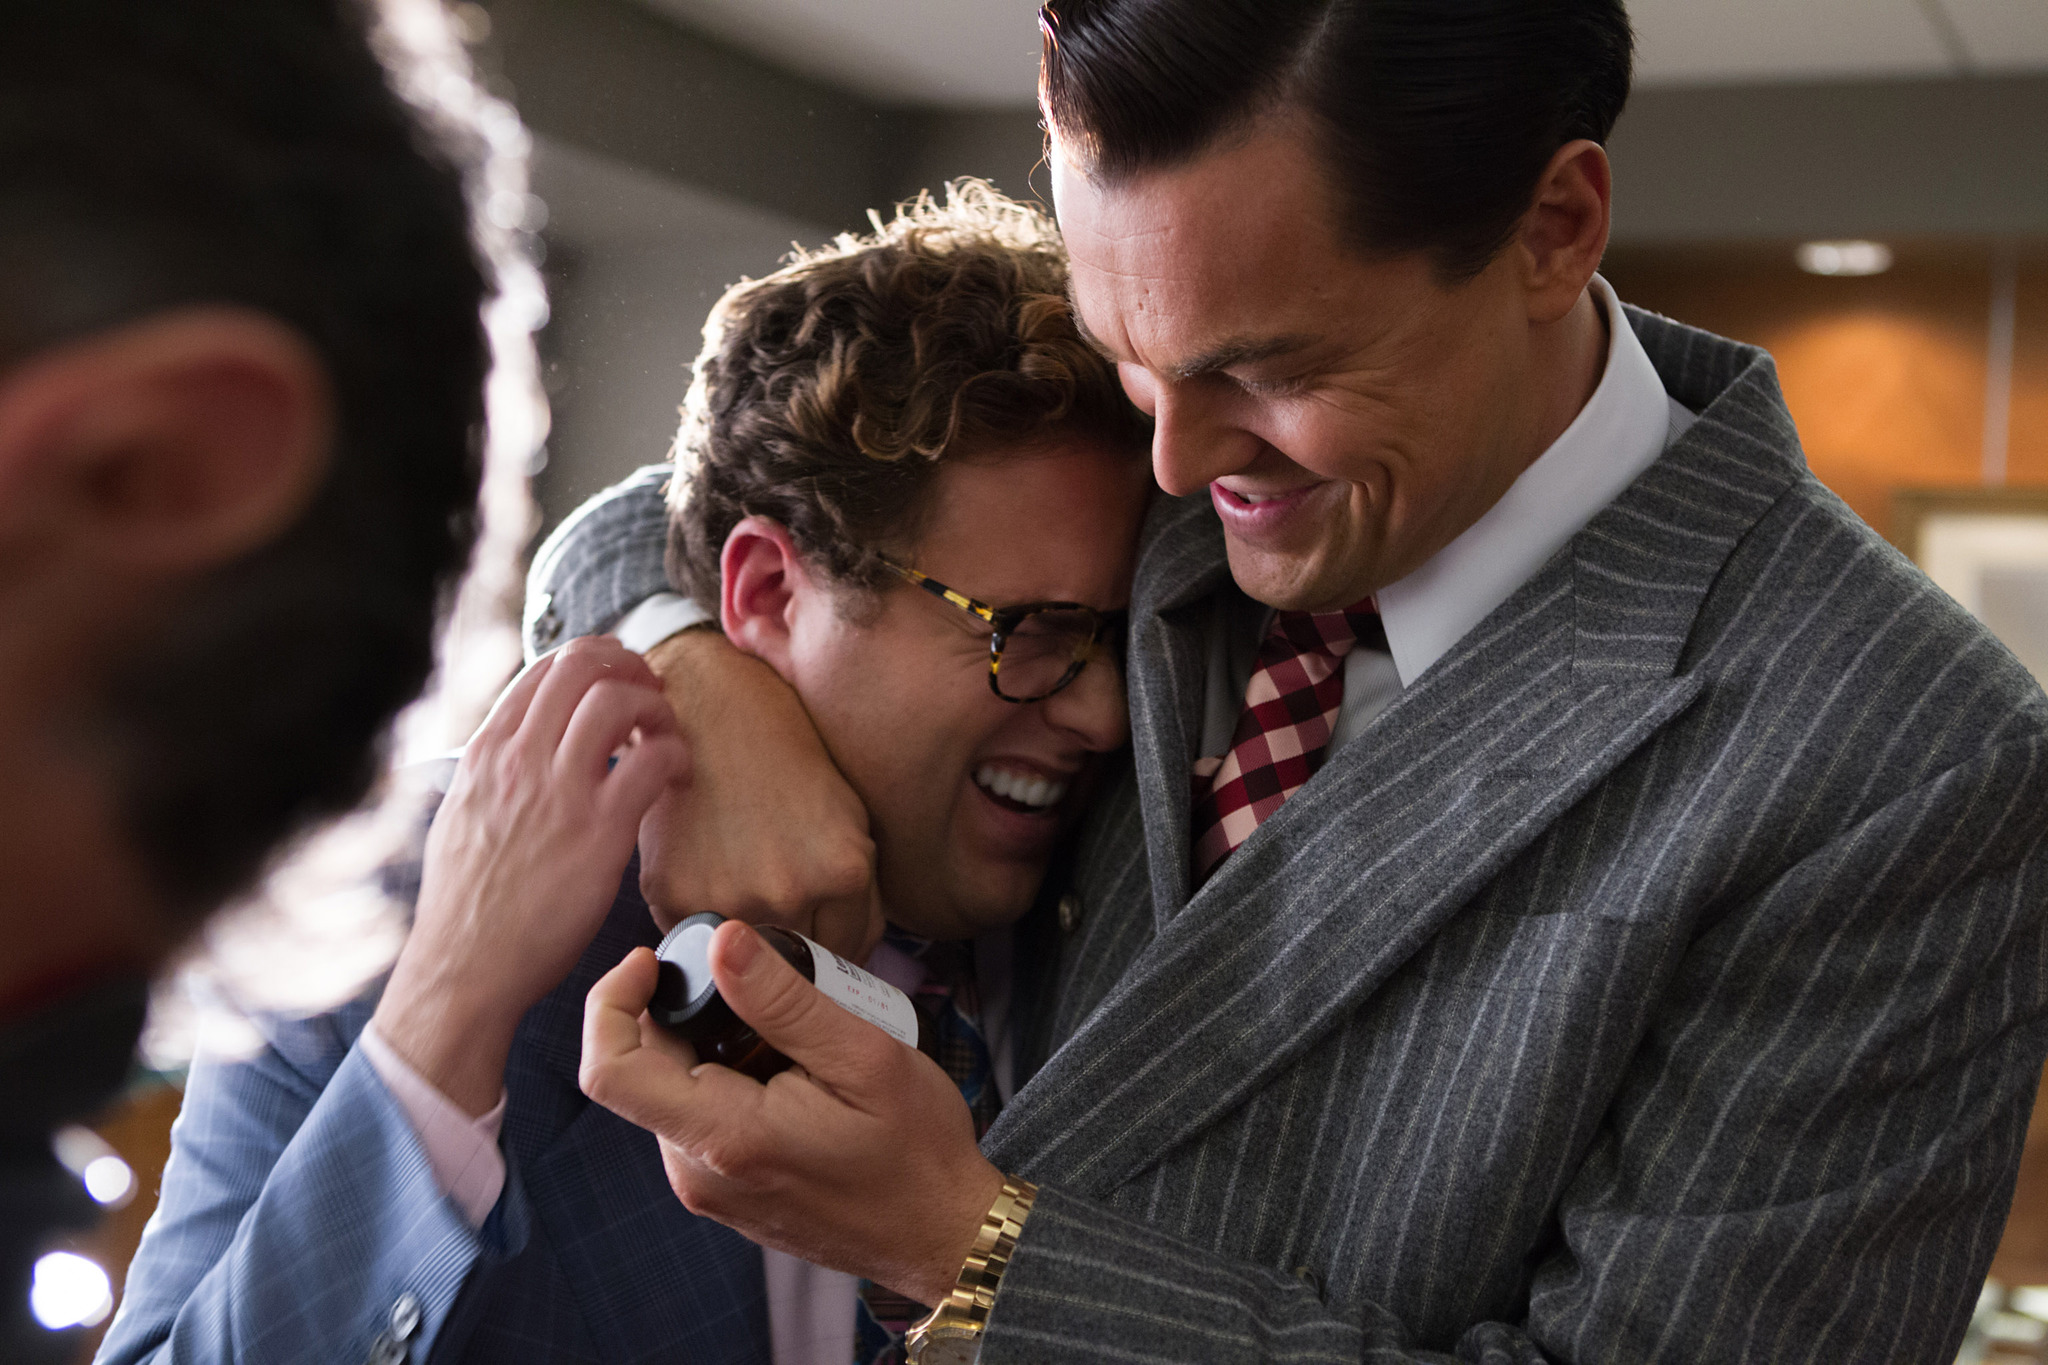 The Wolf Of Wall Street Wallpapers